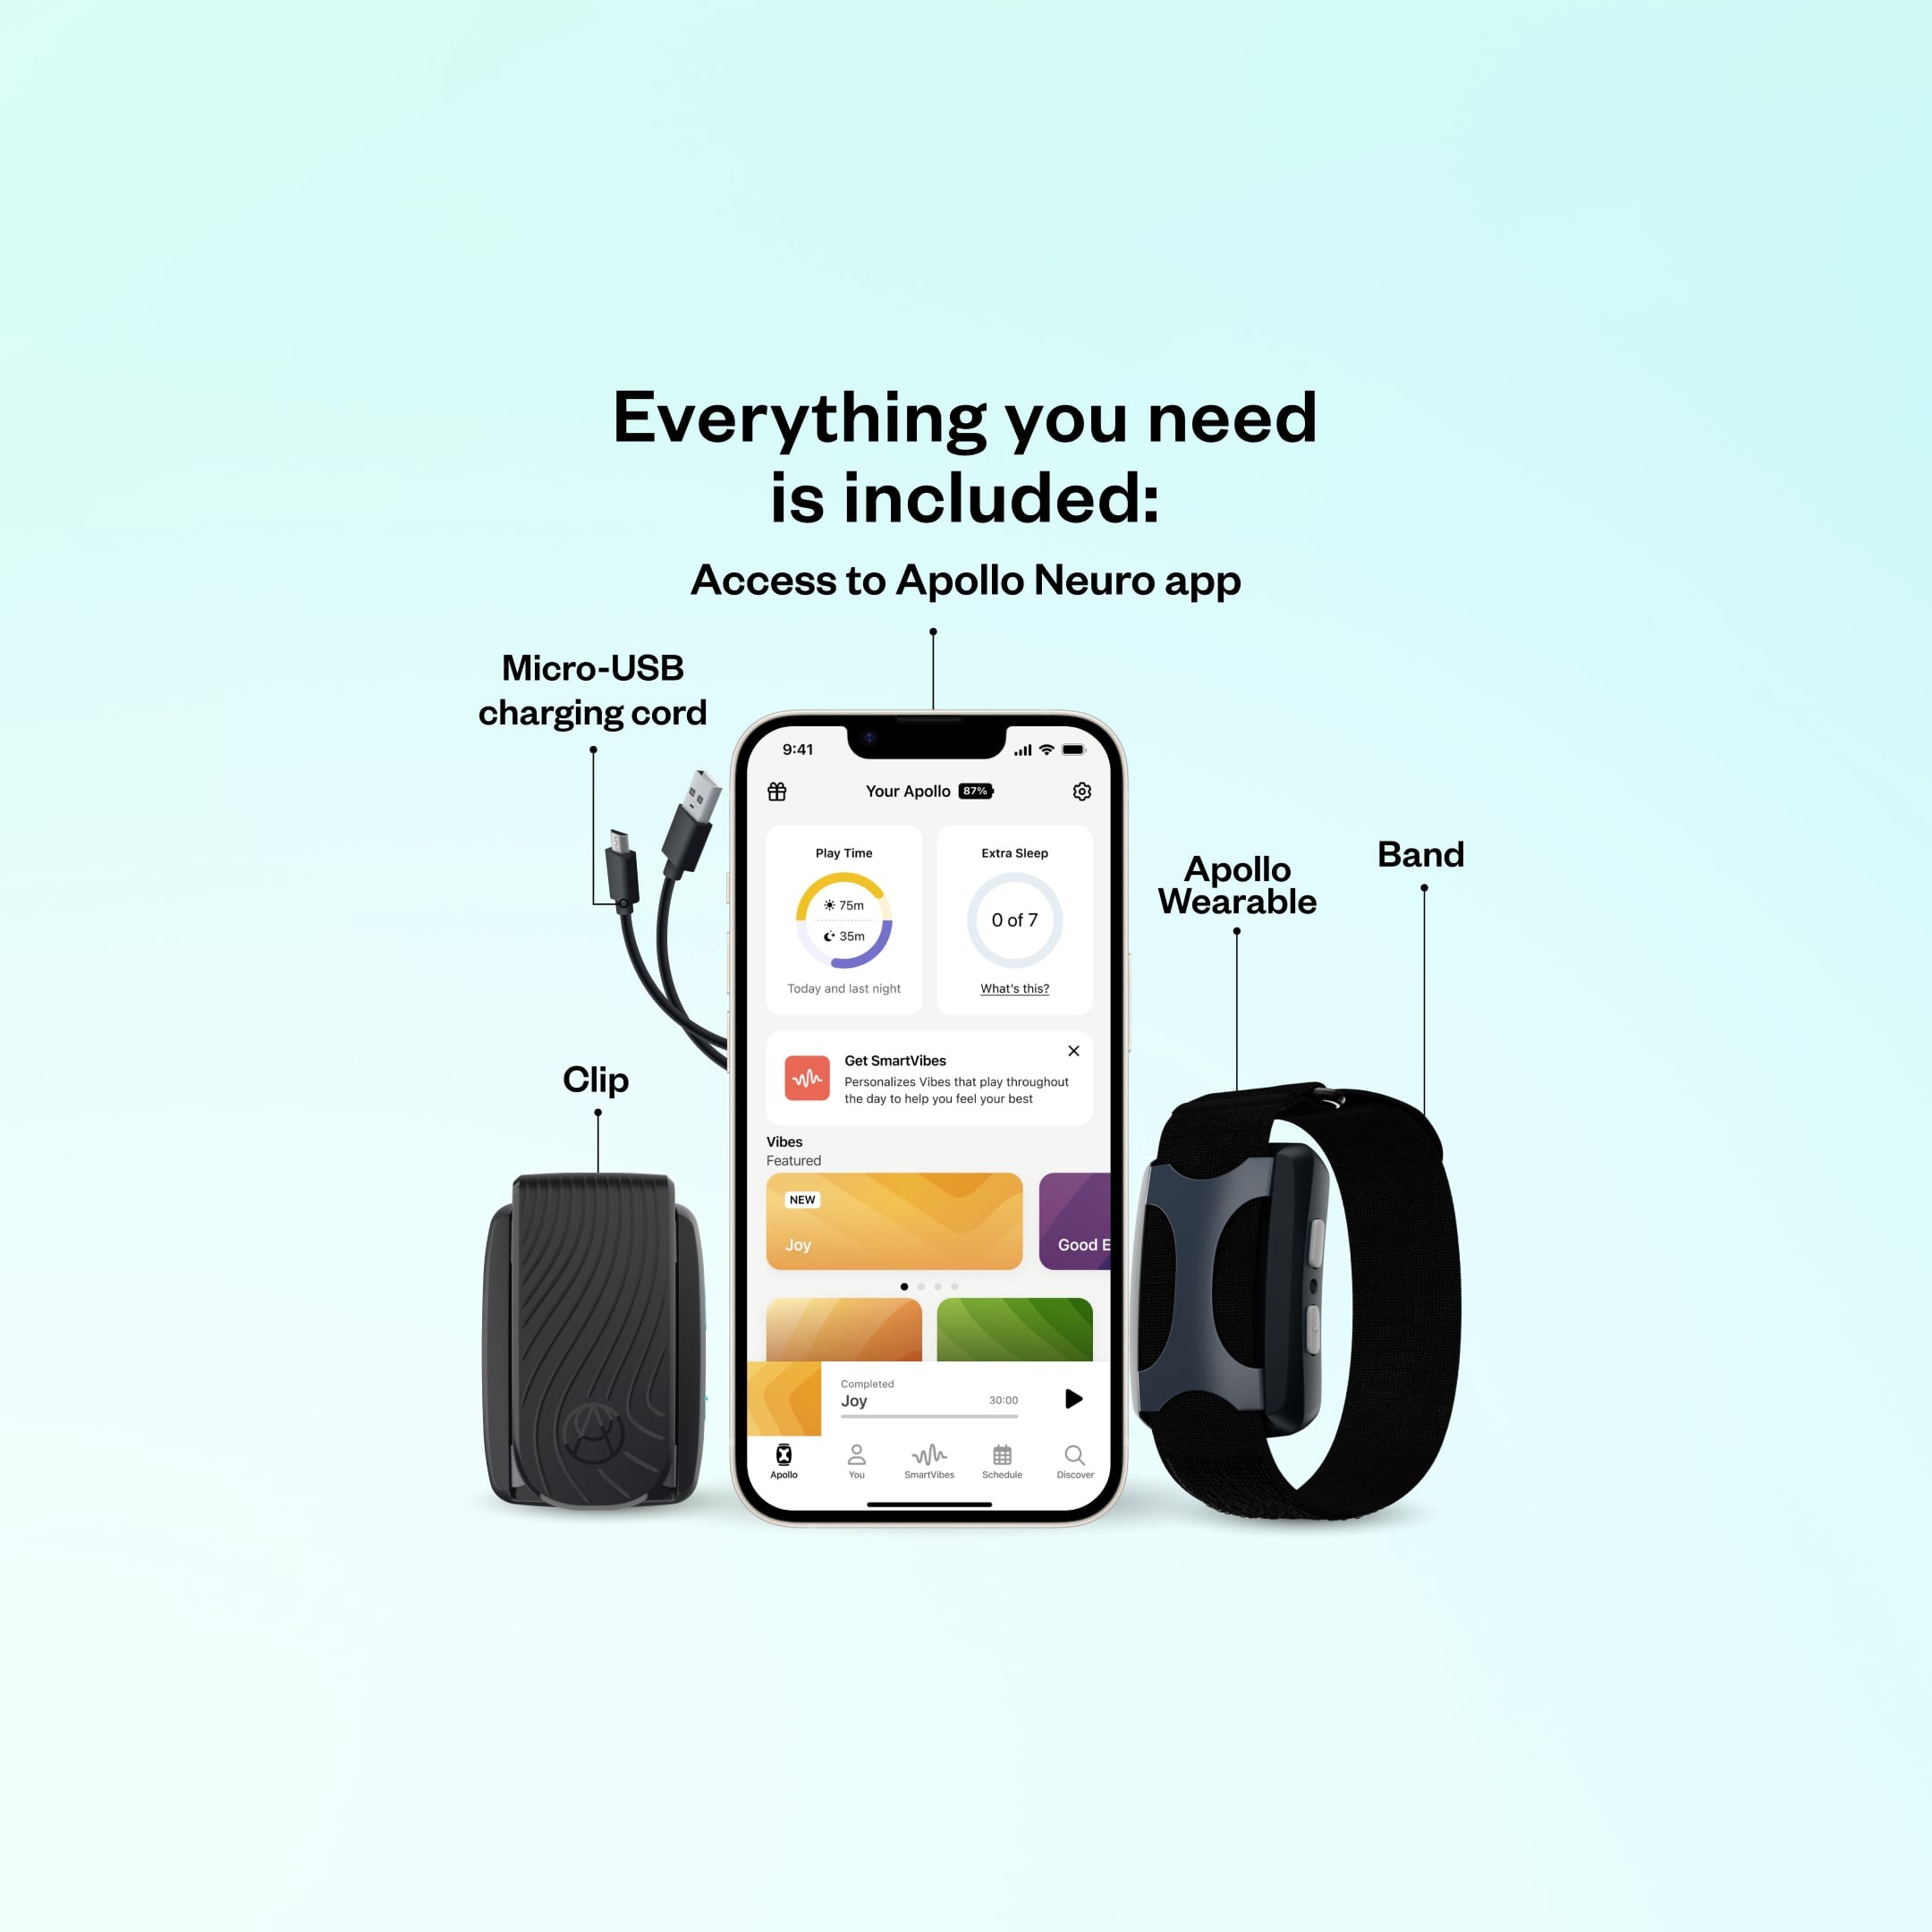 Apollo Wearable - What's Included